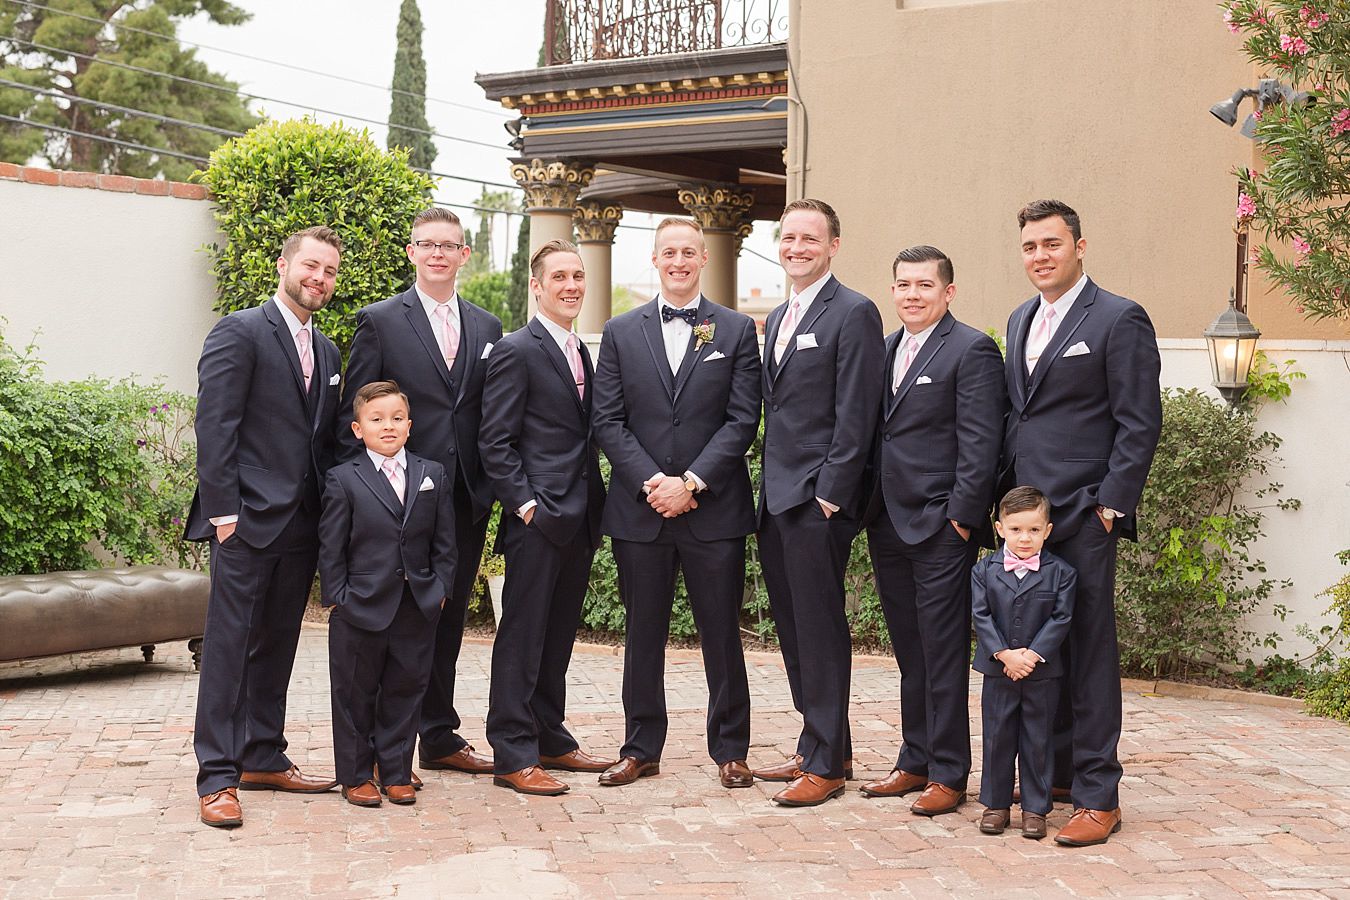 wedding party pictures, navy suits for groomsmen